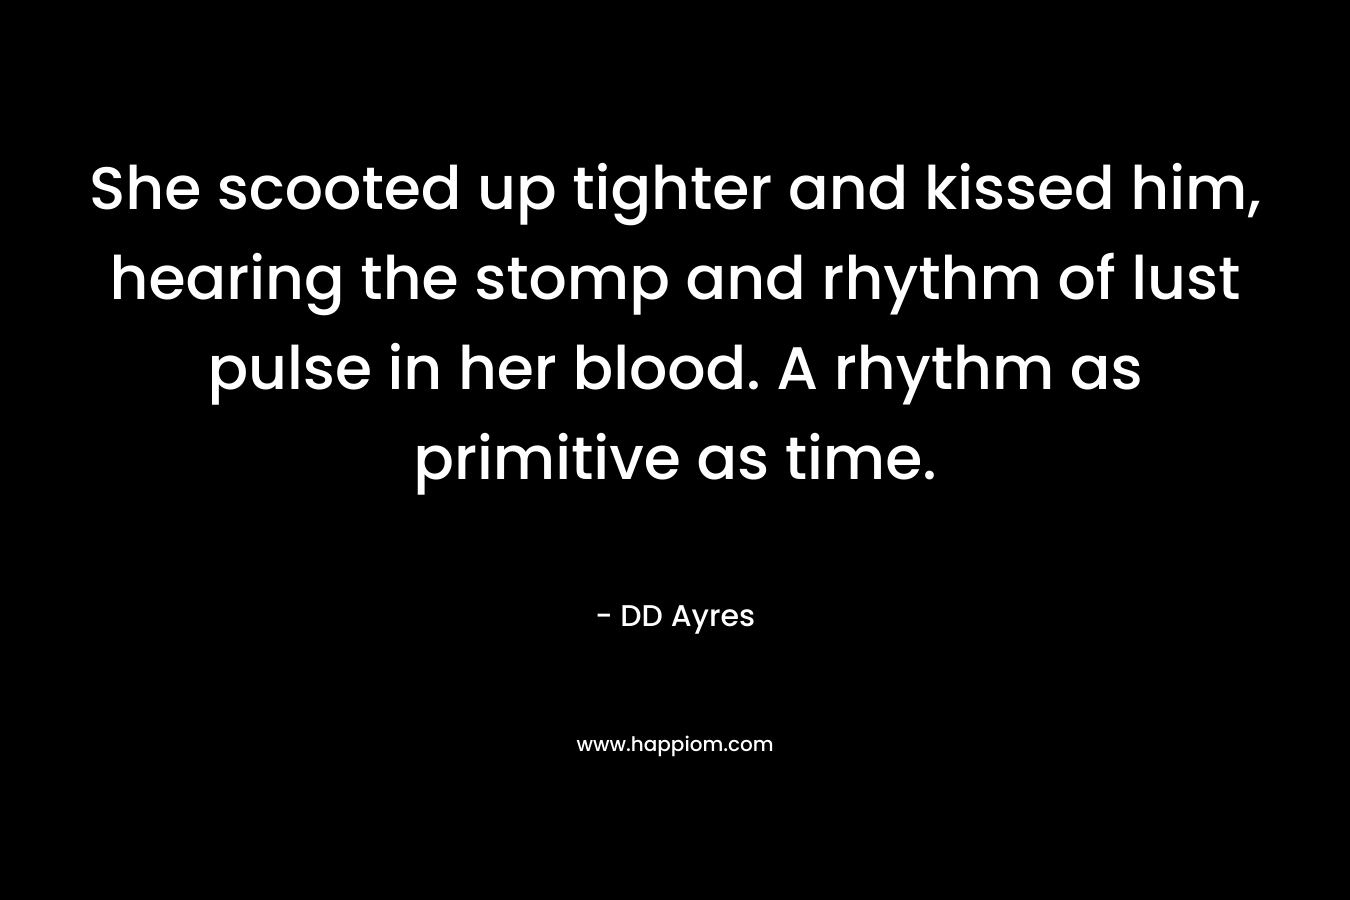 She scooted up tighter and kissed him, hearing the stomp and rhythm of lust pulse in her blood. A rhythm as primitive as time.